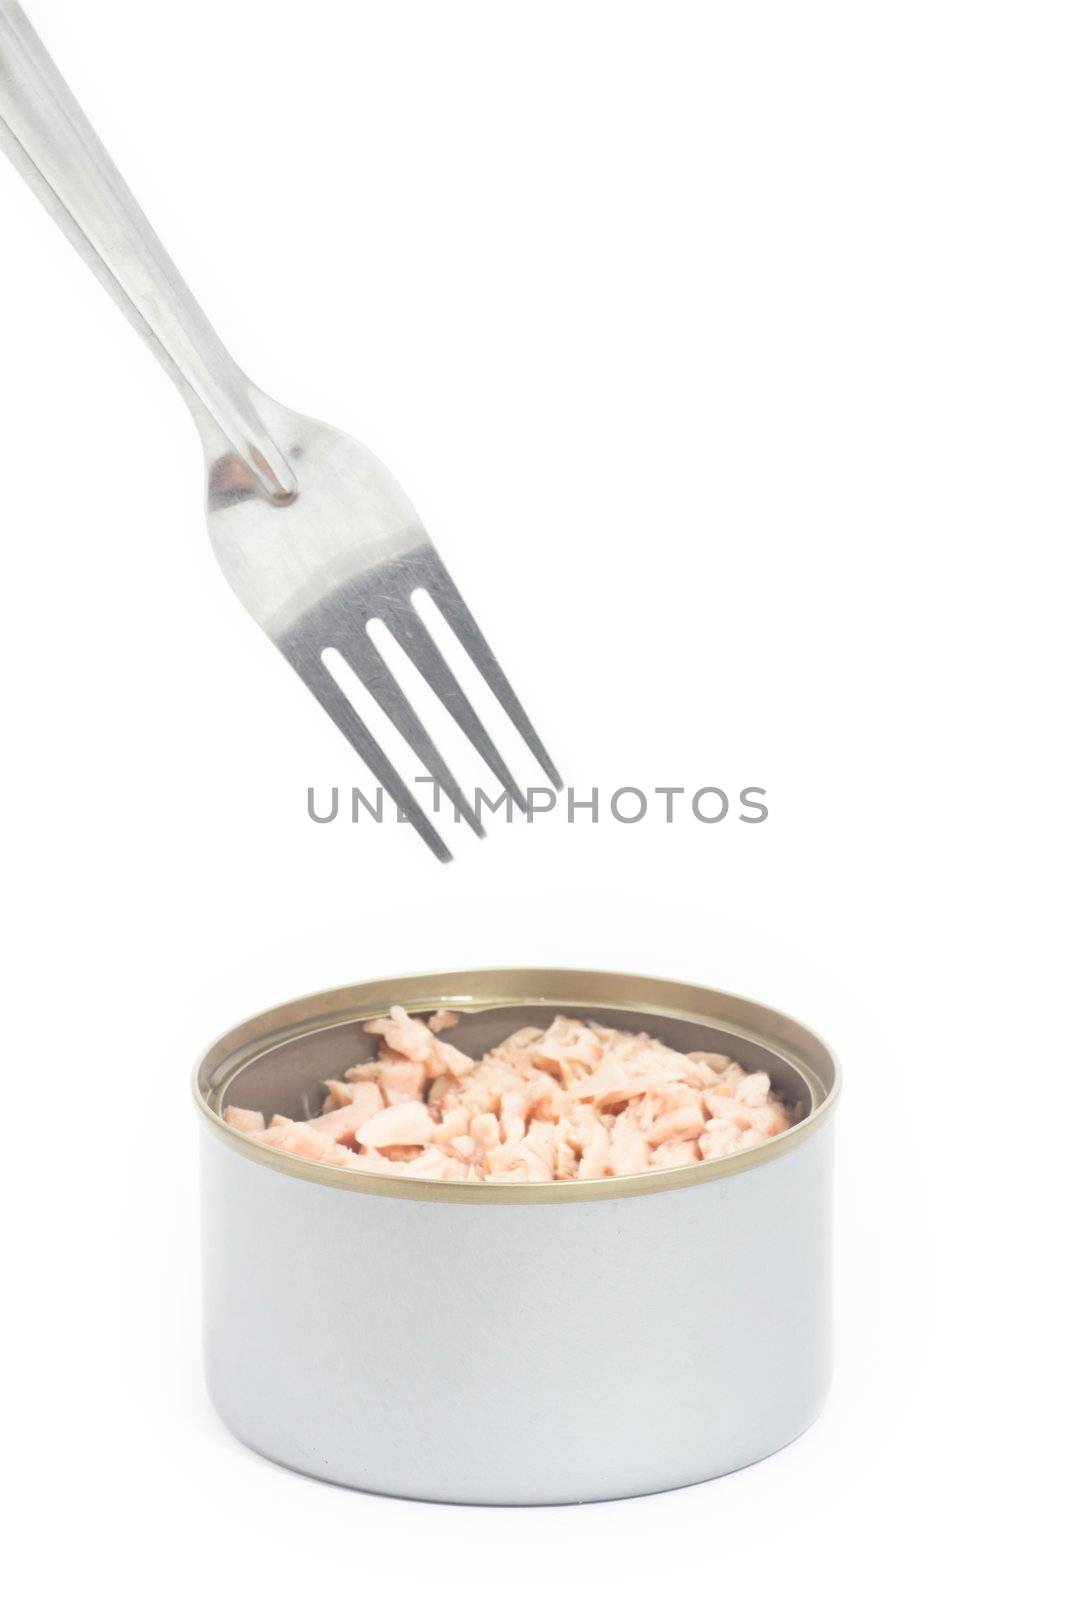 Tuna in vegetable oil with fork on white